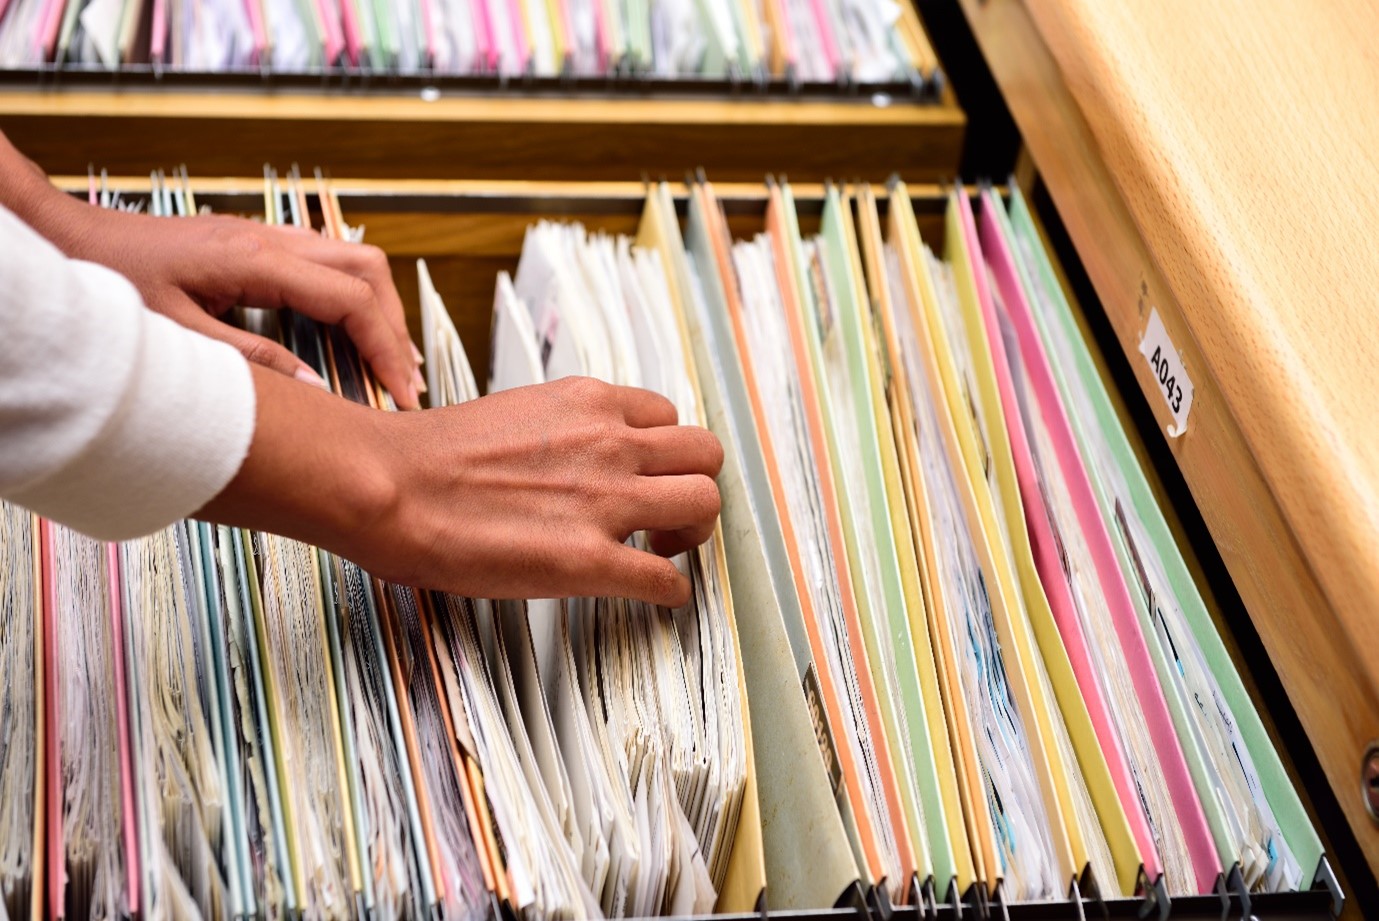 Top Tips for Setting Up a Home Filing System